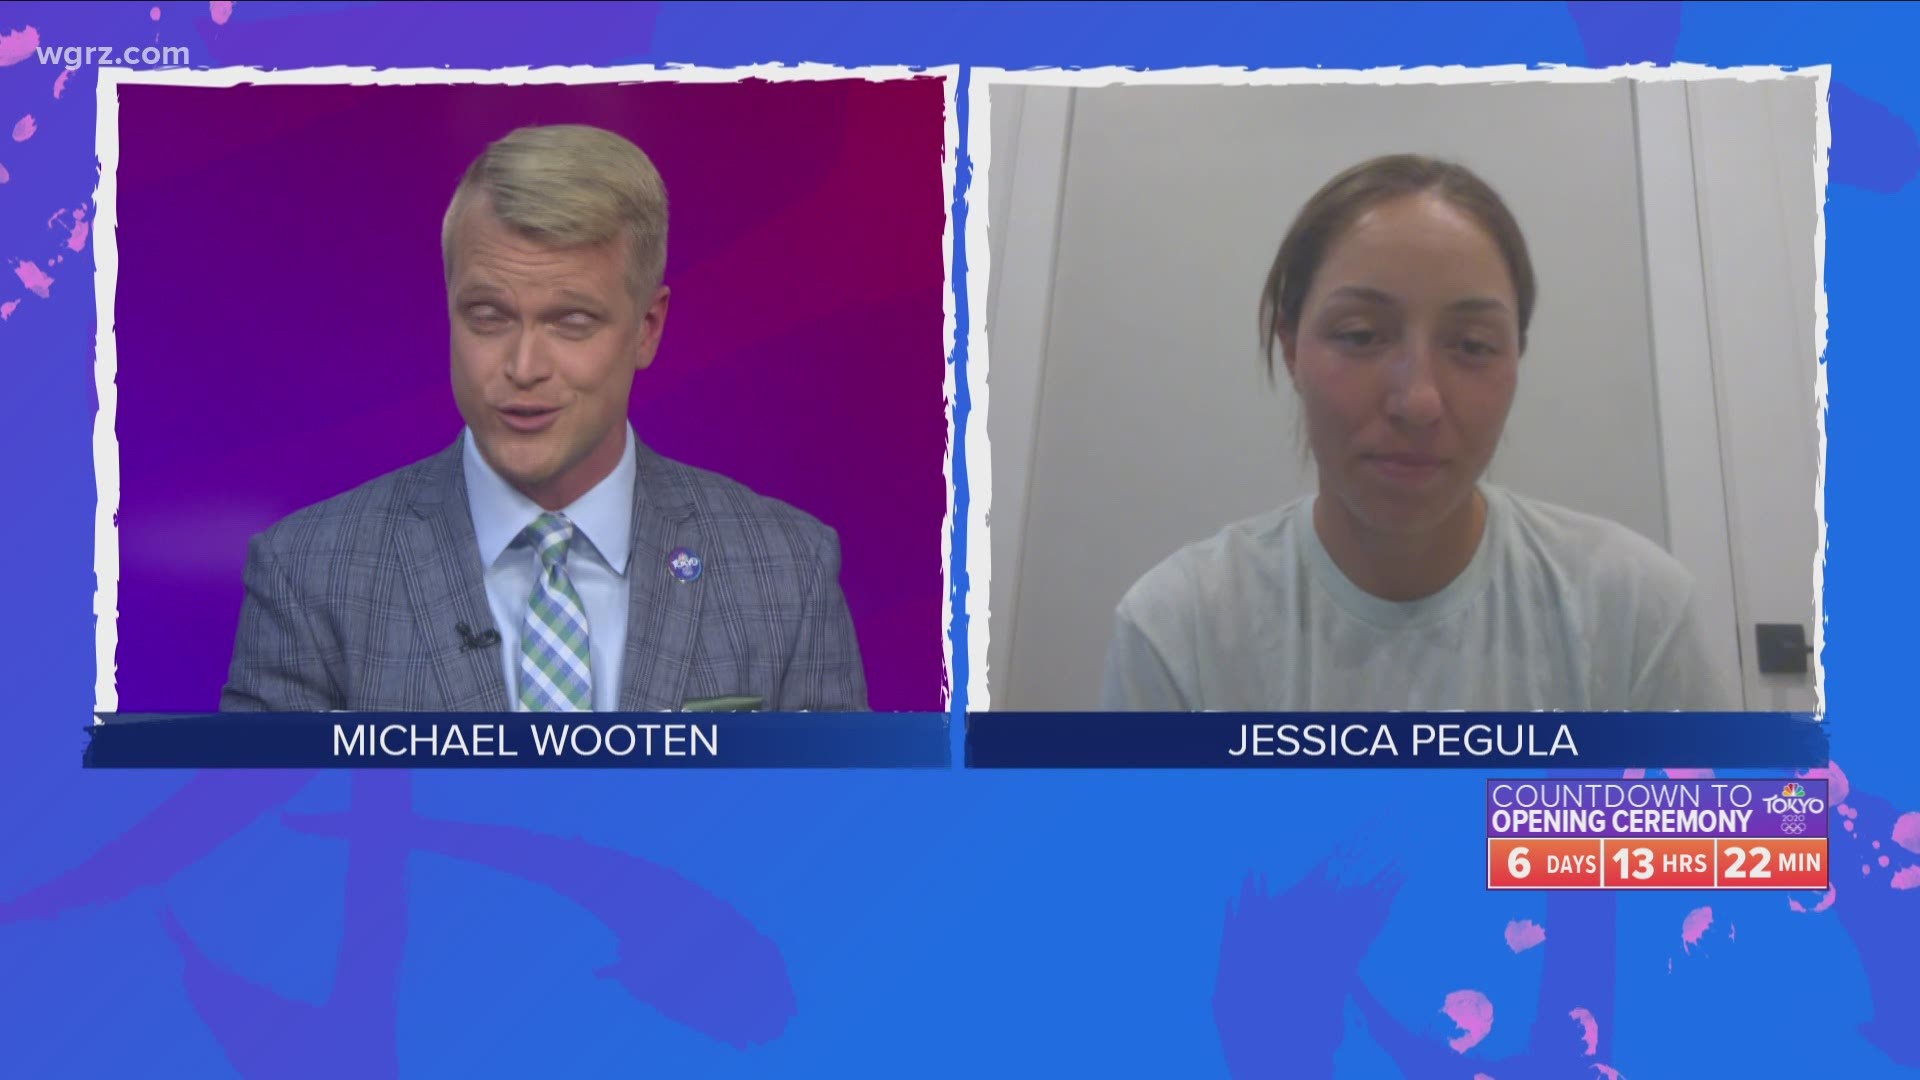 Jessica Pegula joined our Town Hall to discuss her journey to the Summer Olympics.